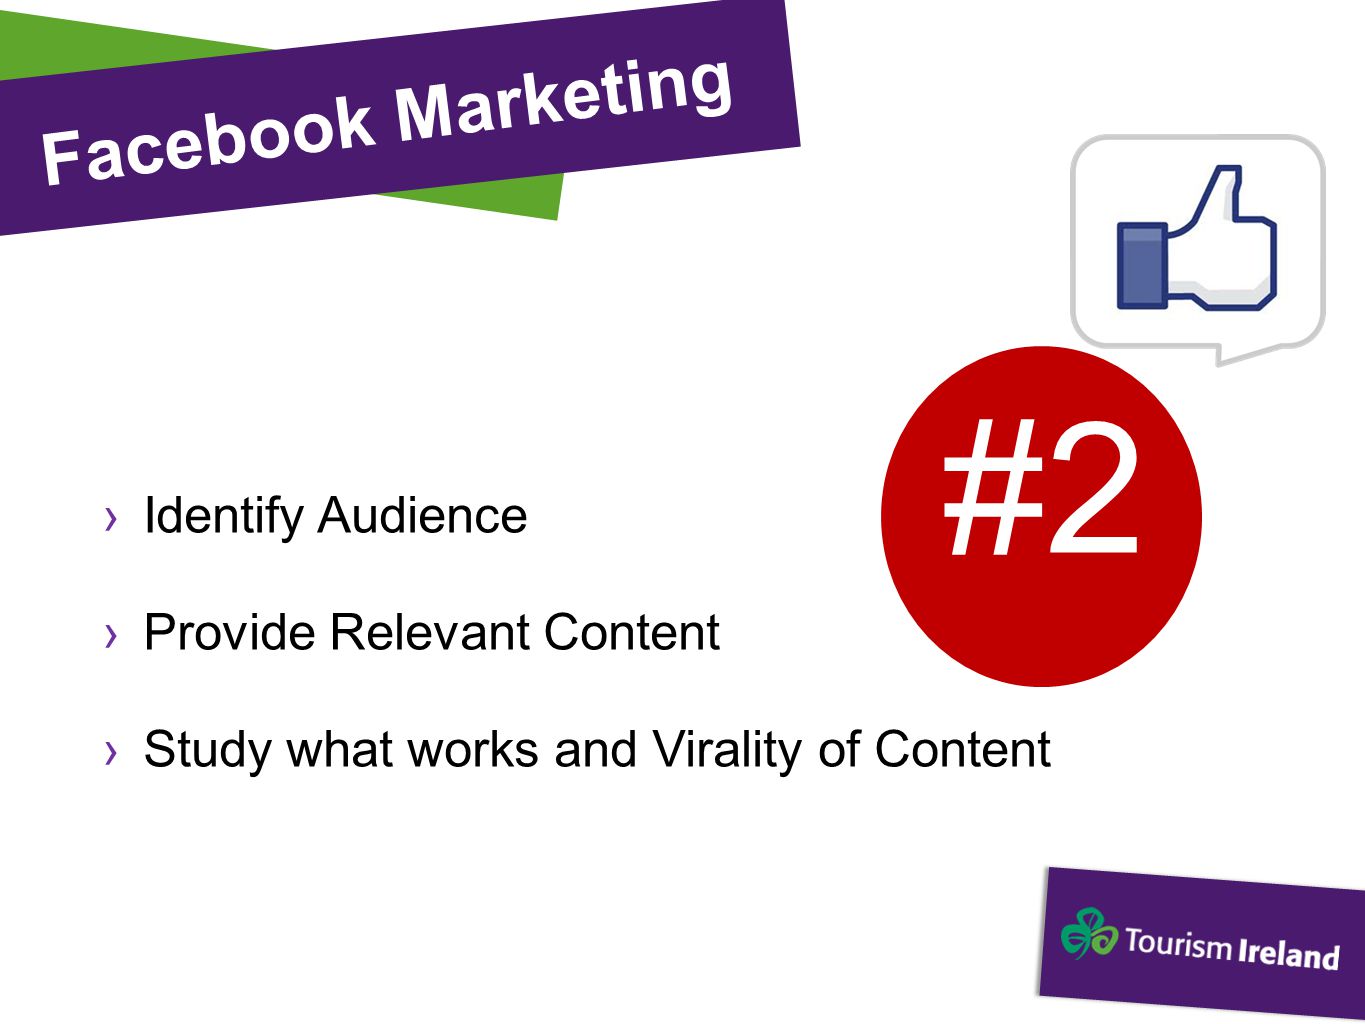 Facebook Marketing ›Identify Audience ›Provide Relevant Content ›Study what works and Virality of Content #2